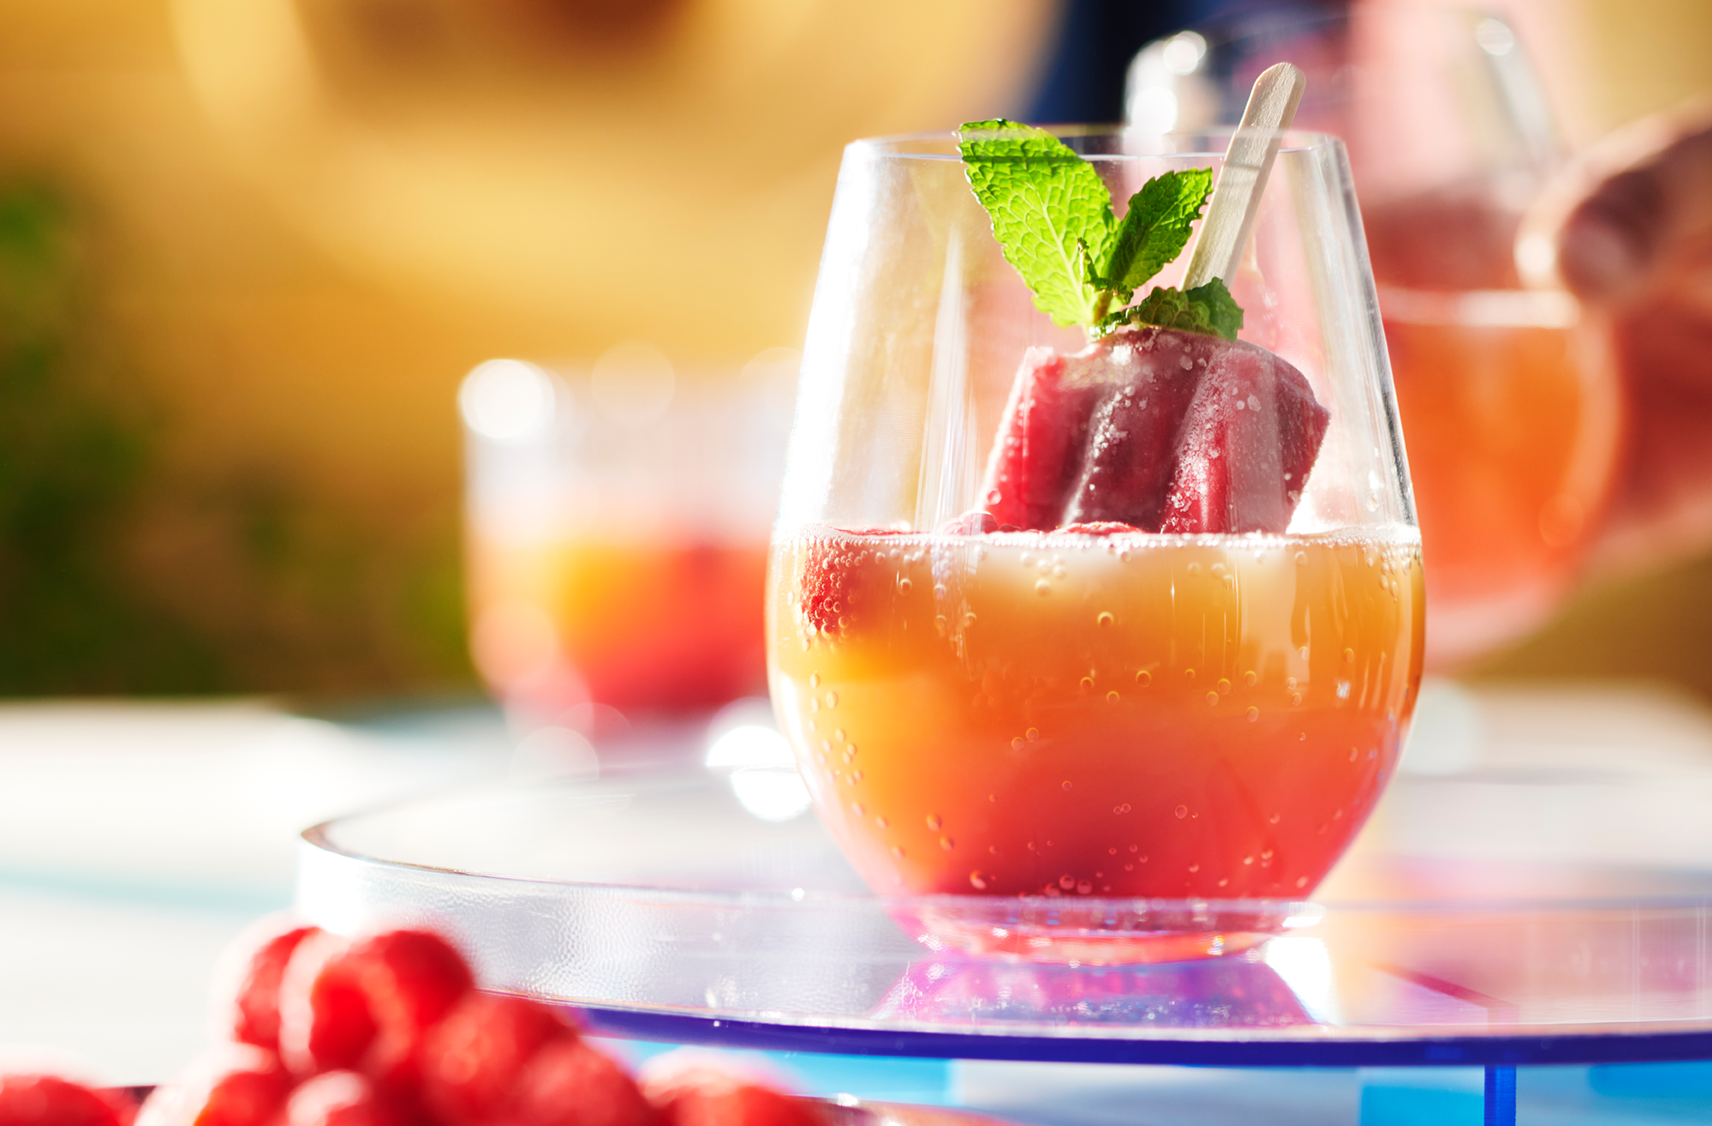 A hand dipping a berry coloured ice pop into a glass filled with orange juice and a sprig of mint.